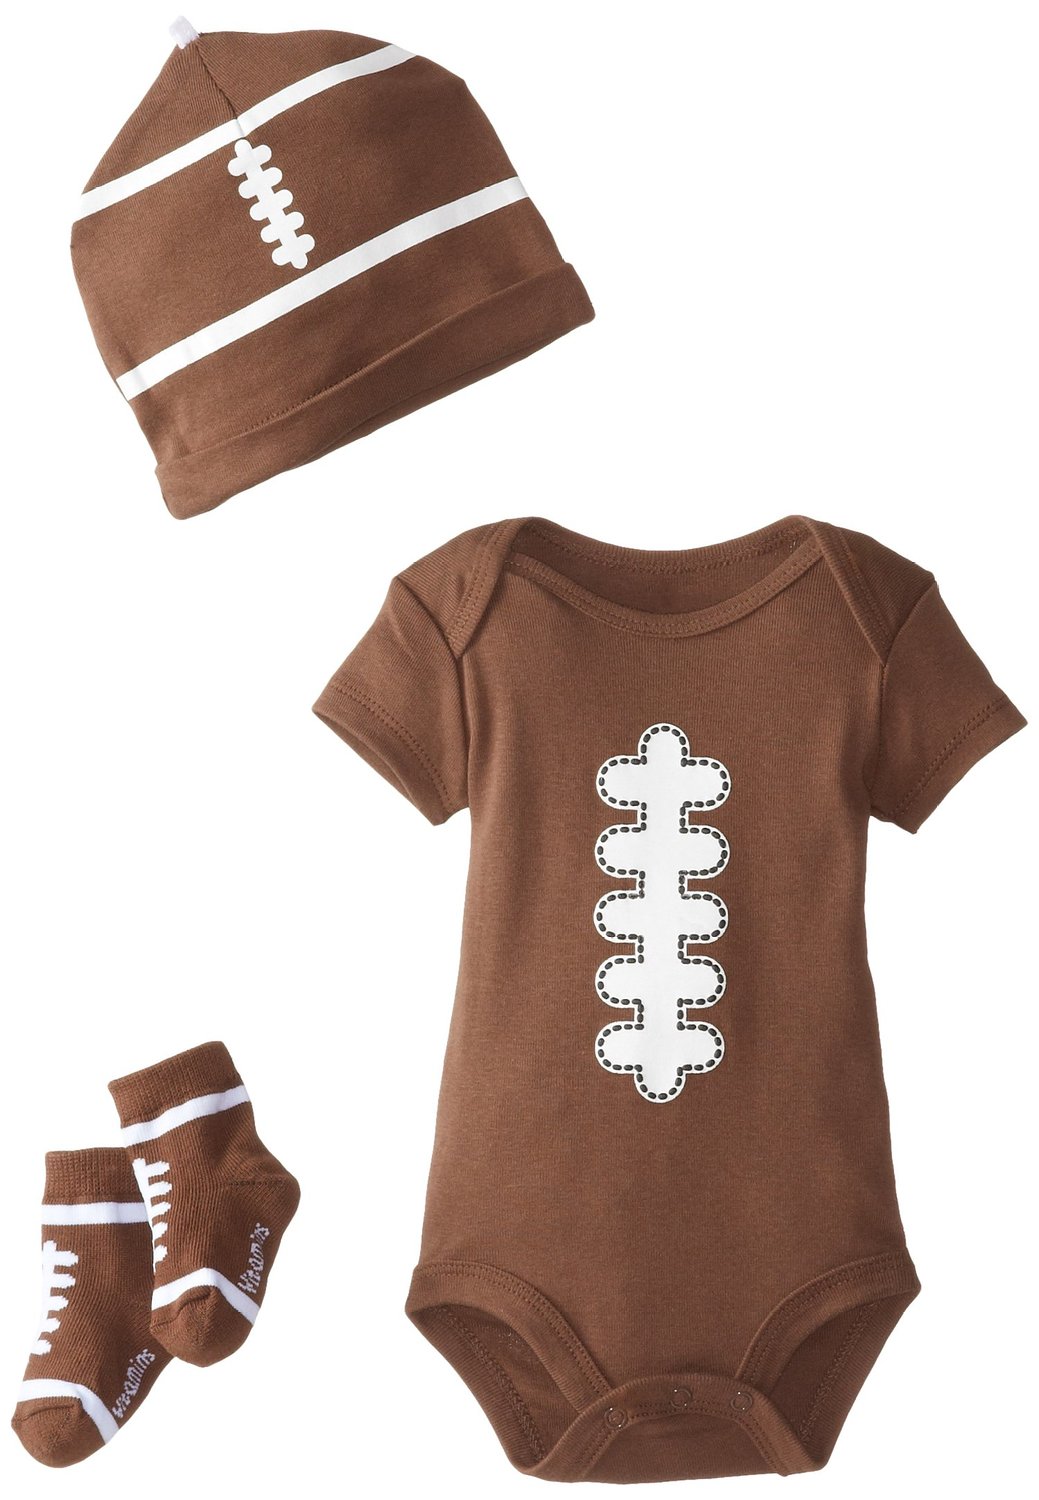 Newborn baby football onesie outfit with hat and socks.  SUPER cute baby shower gift idea!